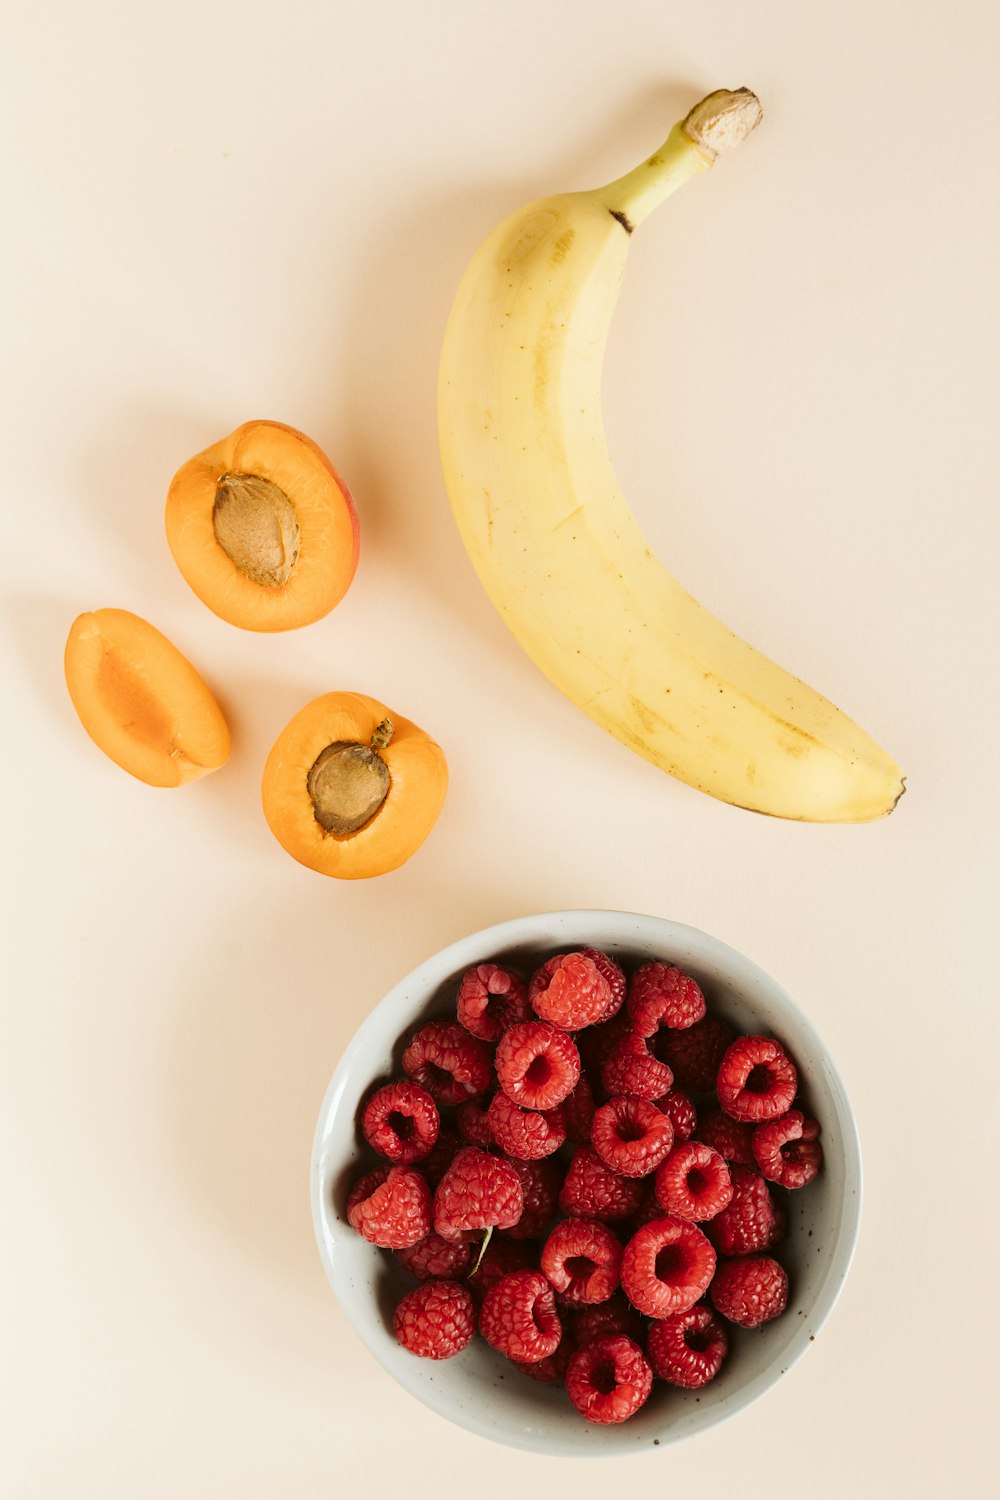 yellow banana and red round fruits on white table